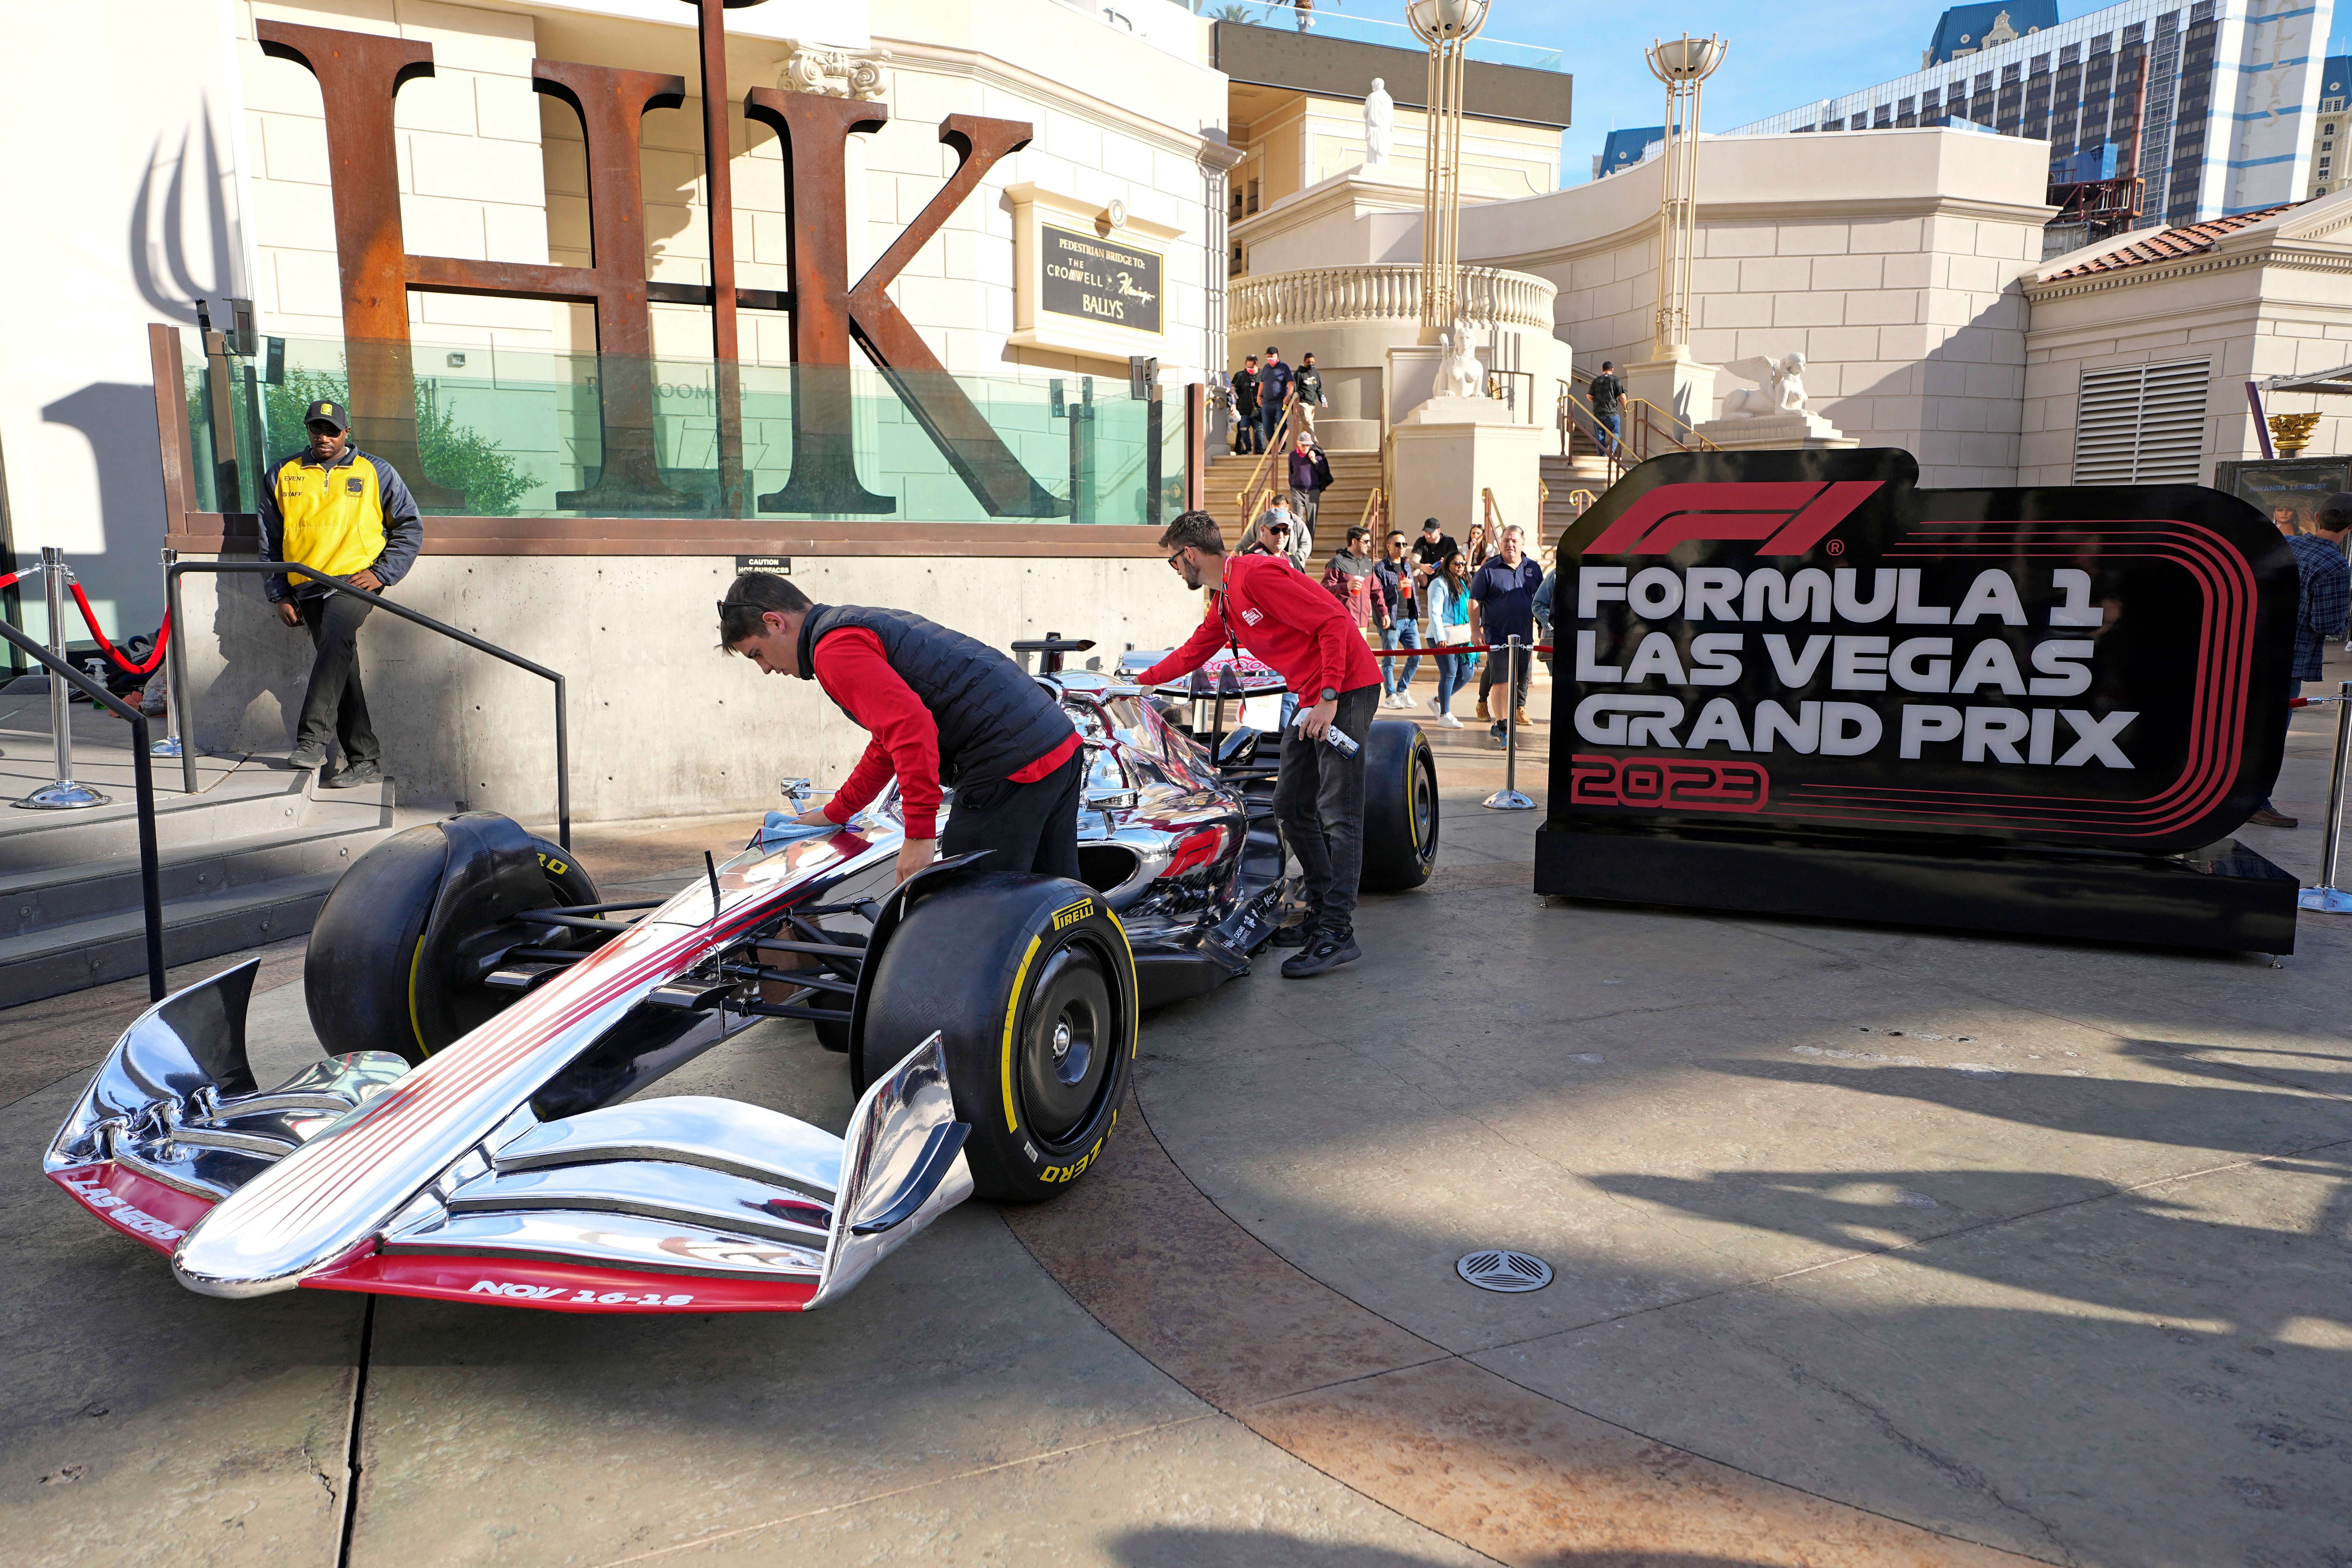 Las Vegas Grand Prix F1 Ticket Prices Dropping but Still a Top Seller 